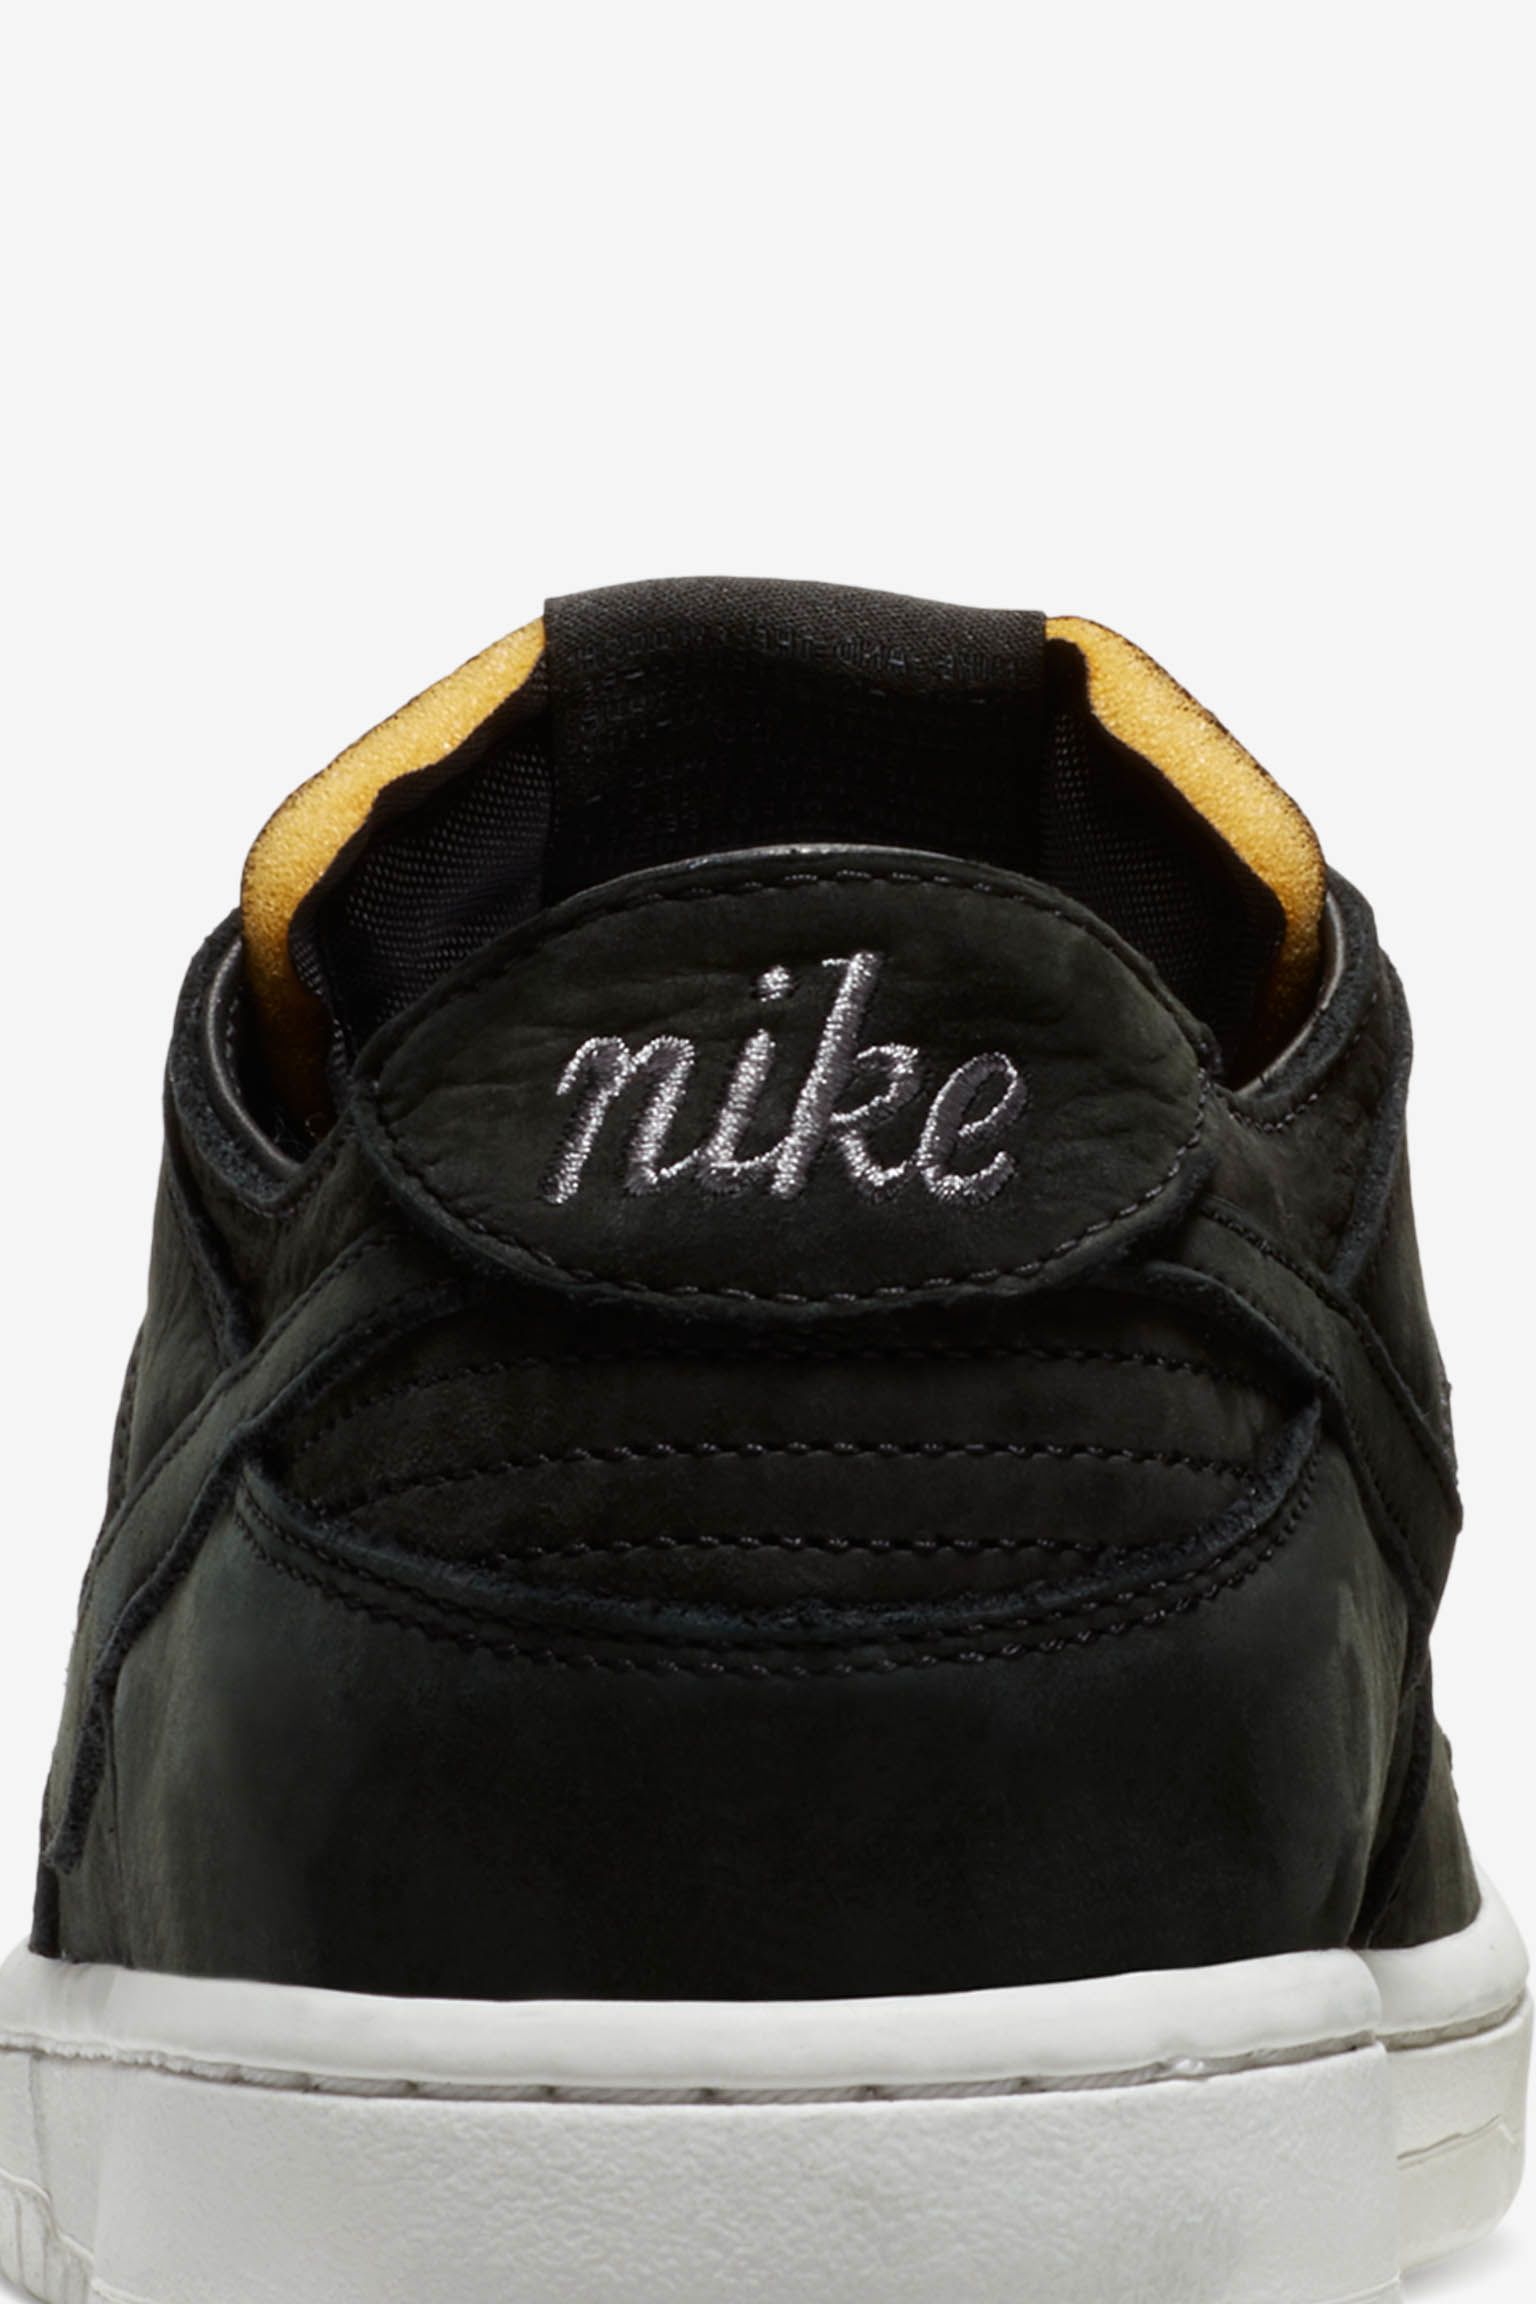 Nike SB Zoom Dunk Low Pro Decon 'Black & Anthracite' Release Date 